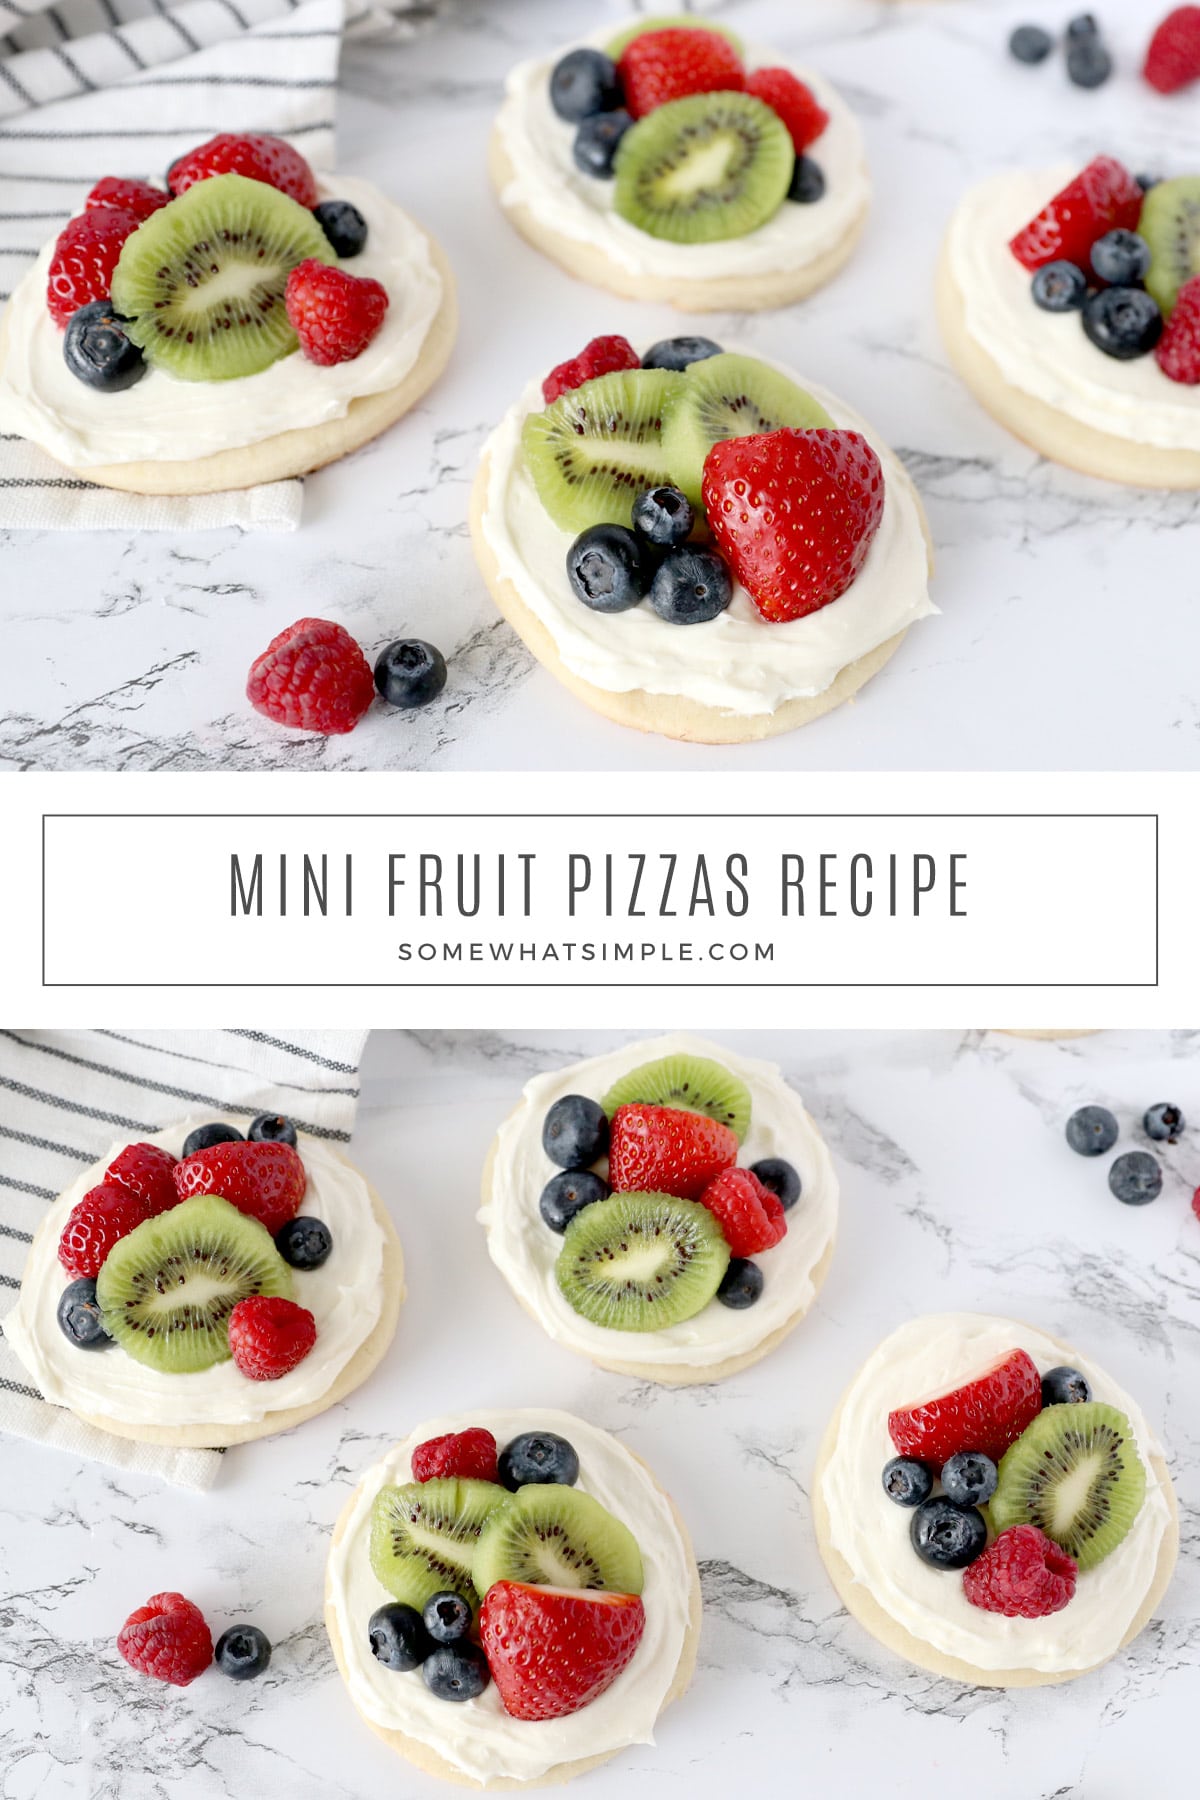 These mini fruit pizzas are made from sugar cookies, cream cheese frosting, and fresh fruit. They're a delicious summertime dessert that is perfect for a Sunday brunch. via @somewhatsimple